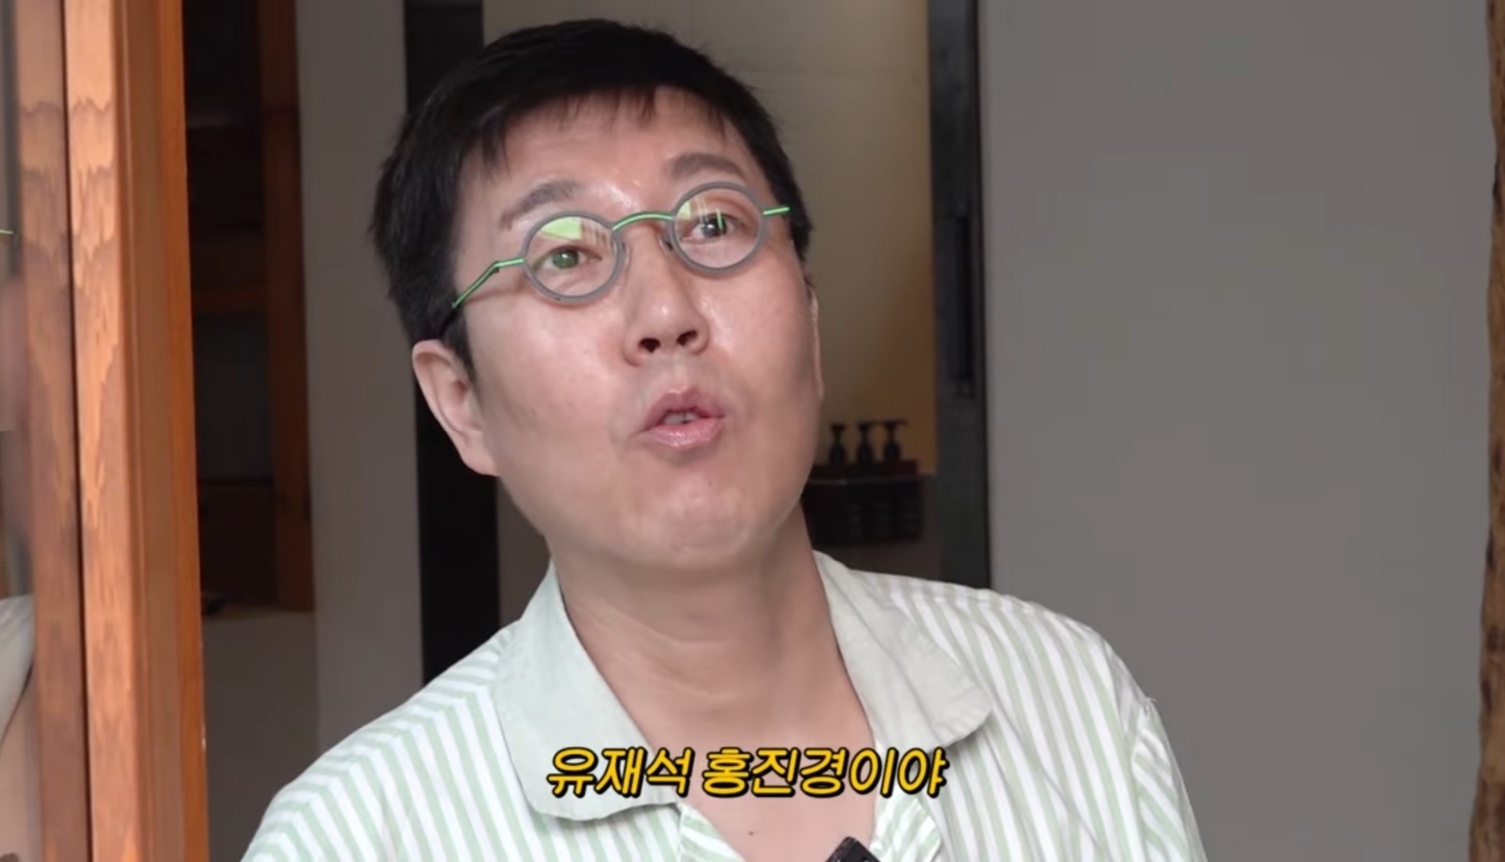 K-Comedy’s Dynamic Duo: Kim YoungChul and Hong JinKyung Stir Laughs with Impersonations